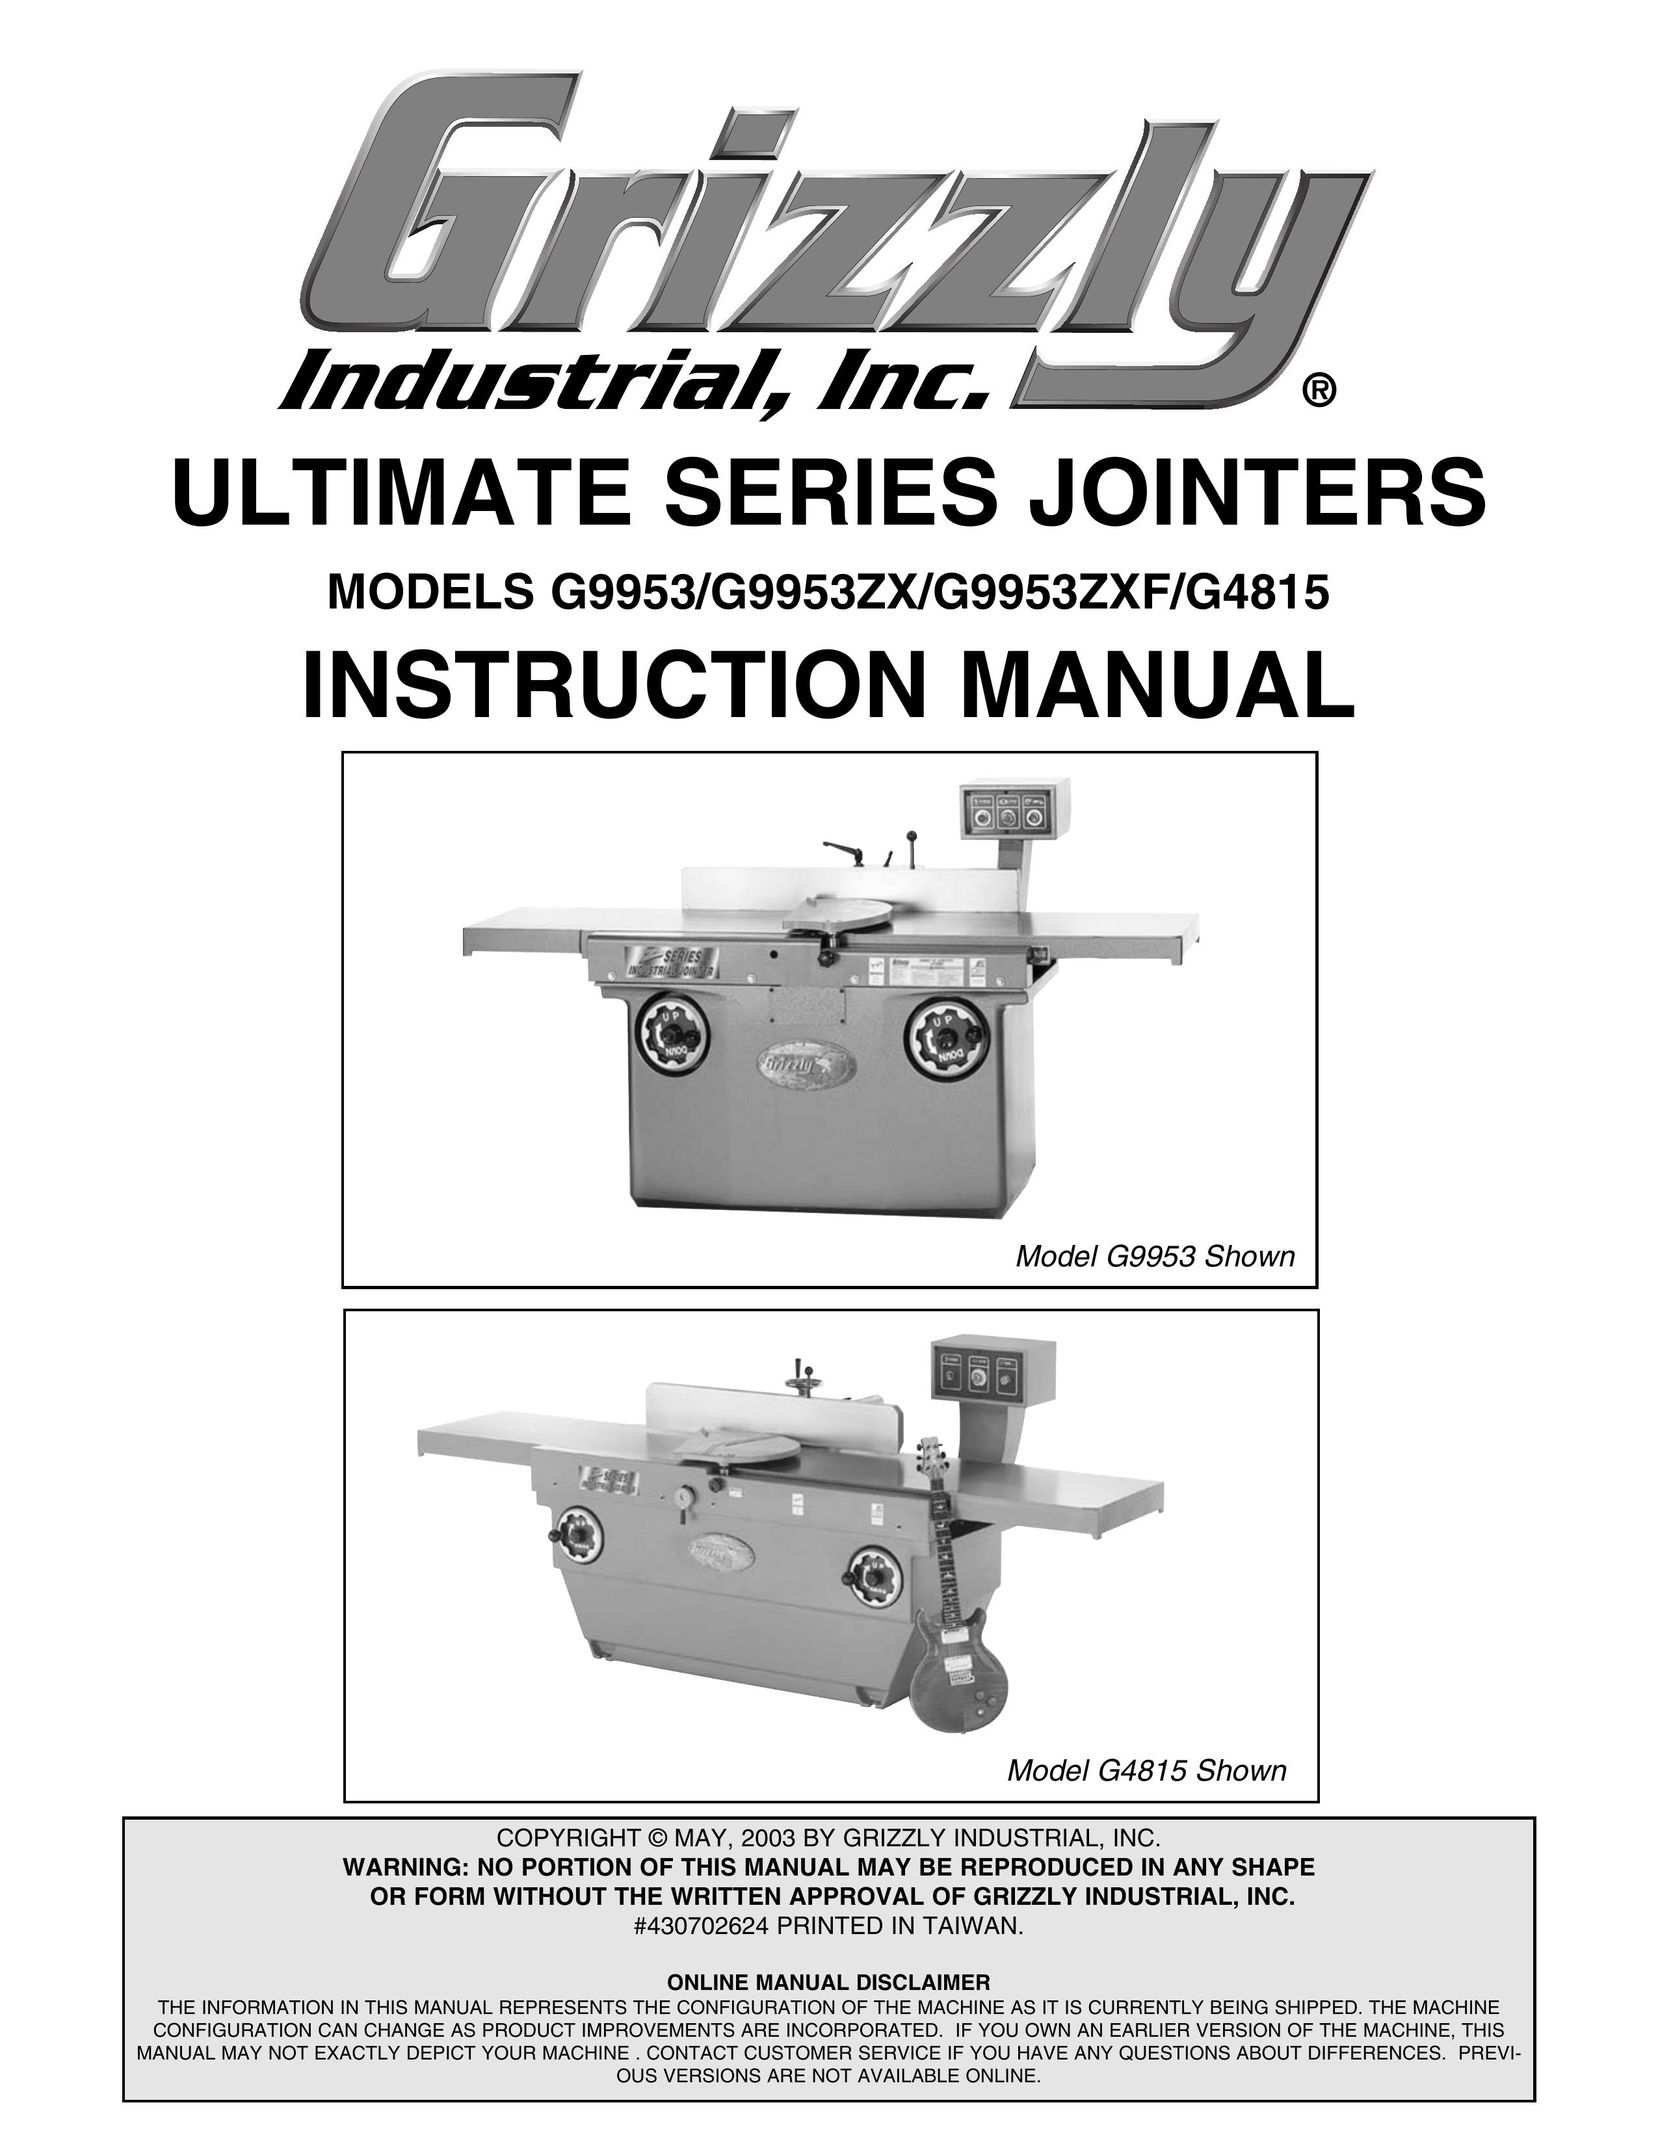 Grizzly G9953ZX Biscuit Joiner User Manual